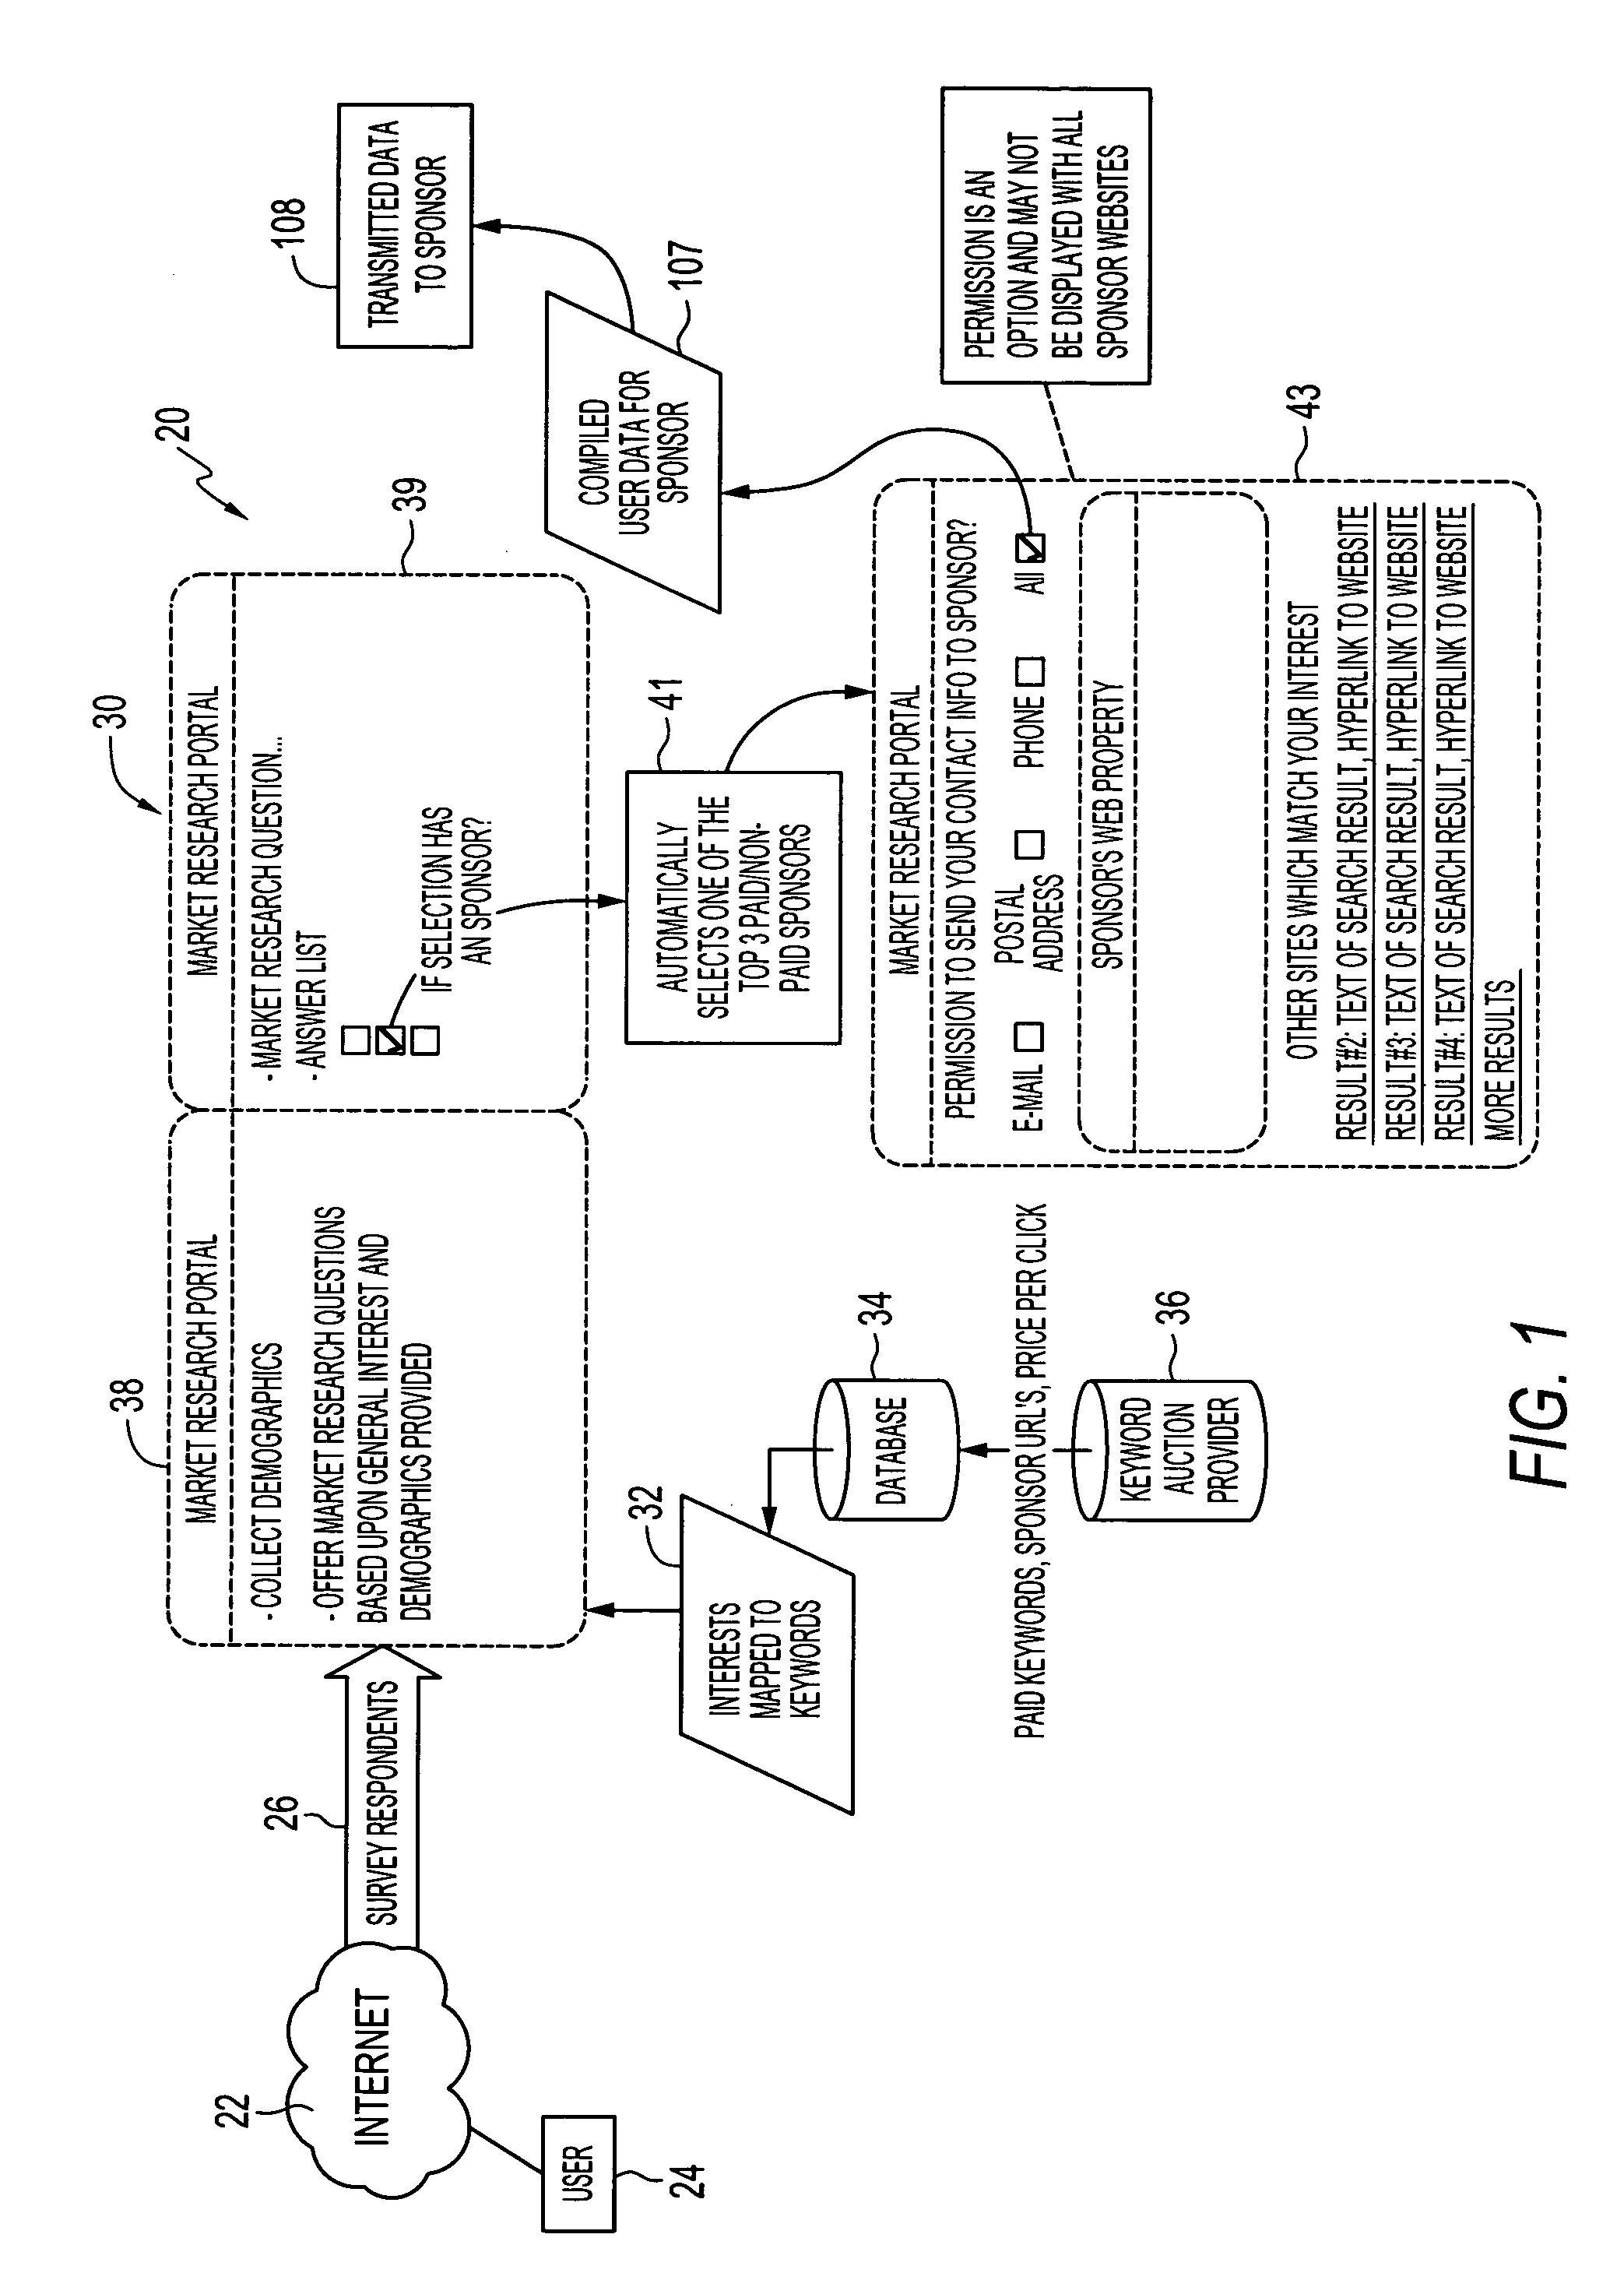 Interactive online research system and method